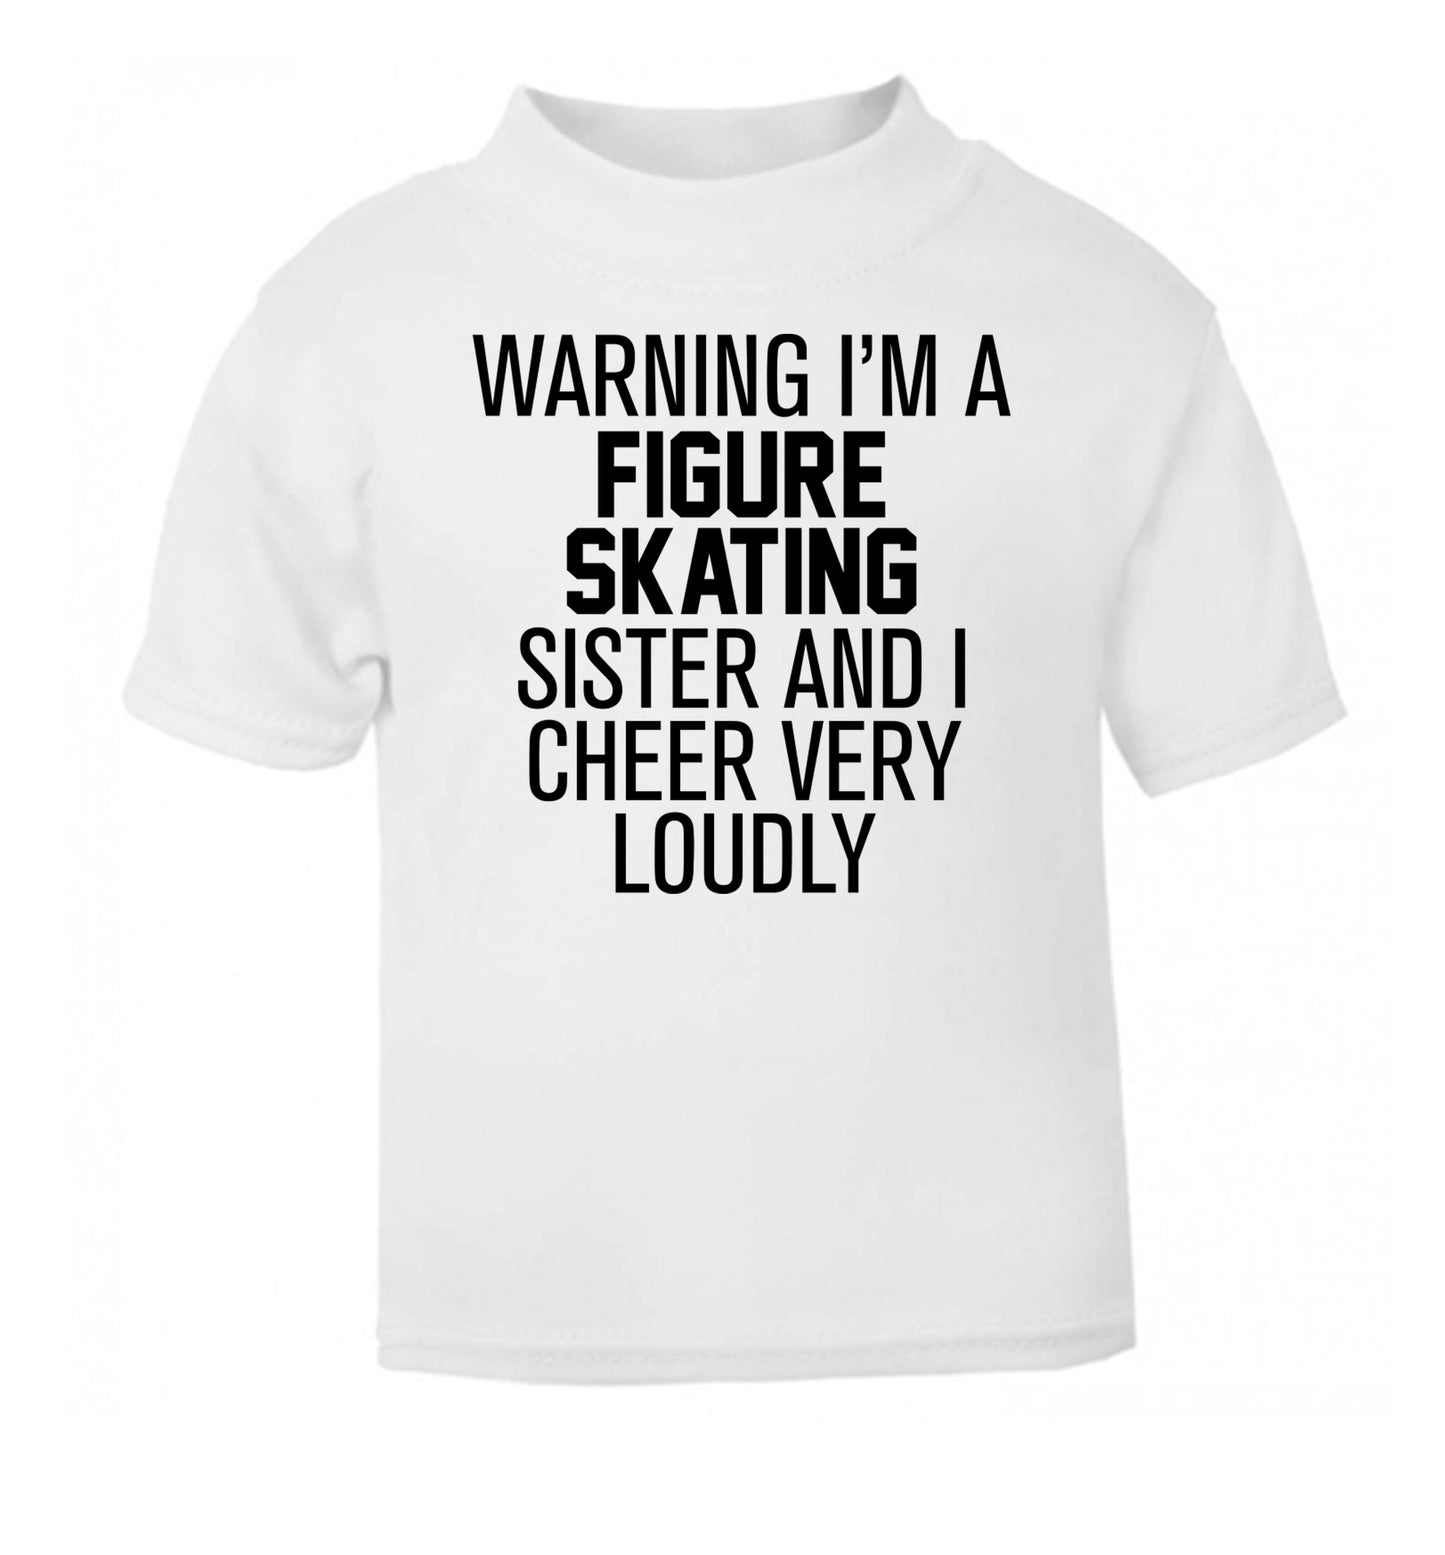 Warning I'm a figure skating sister and I cheer very loudly white Baby Toddler Tshirt 2 Years